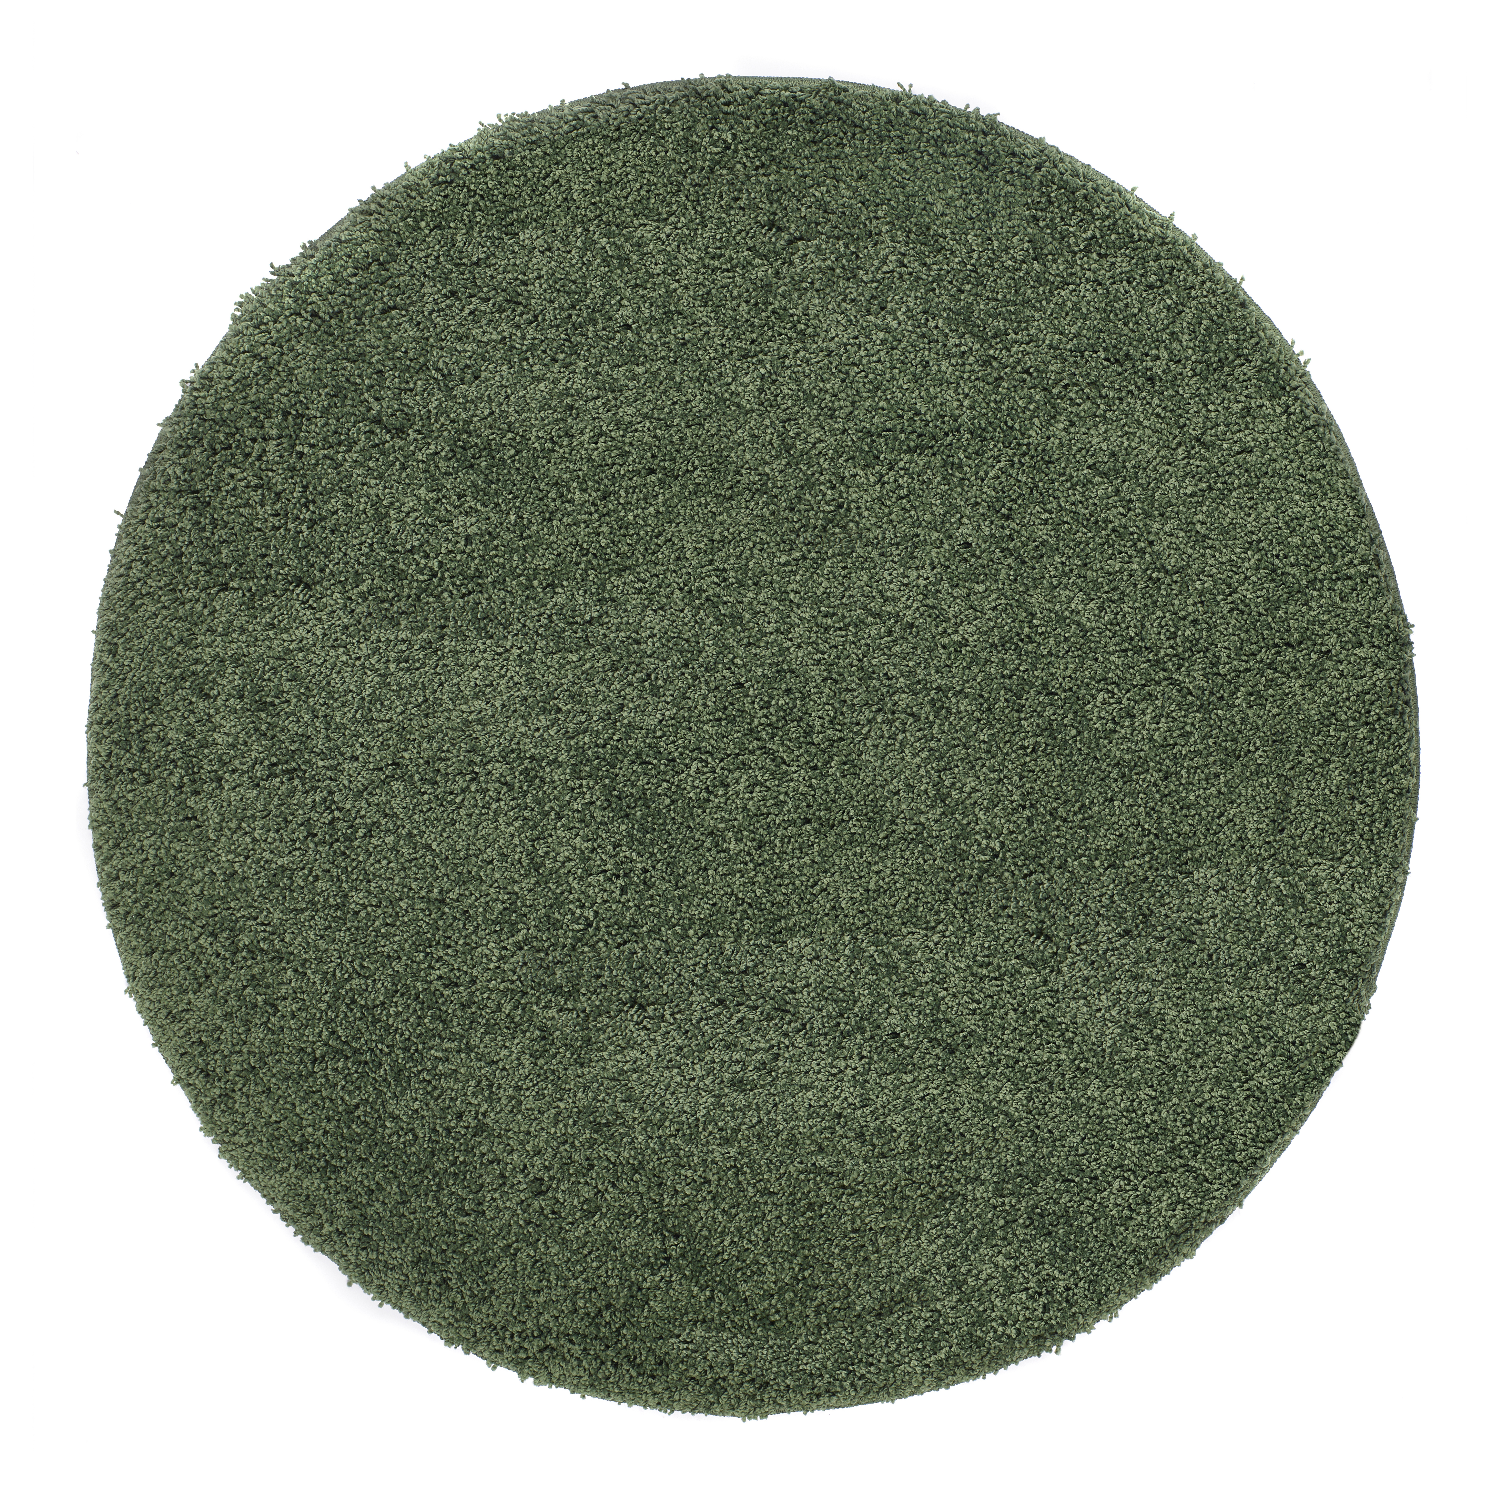 Photo of Ripley shaggy stain resistant round green rug - 100x100cm